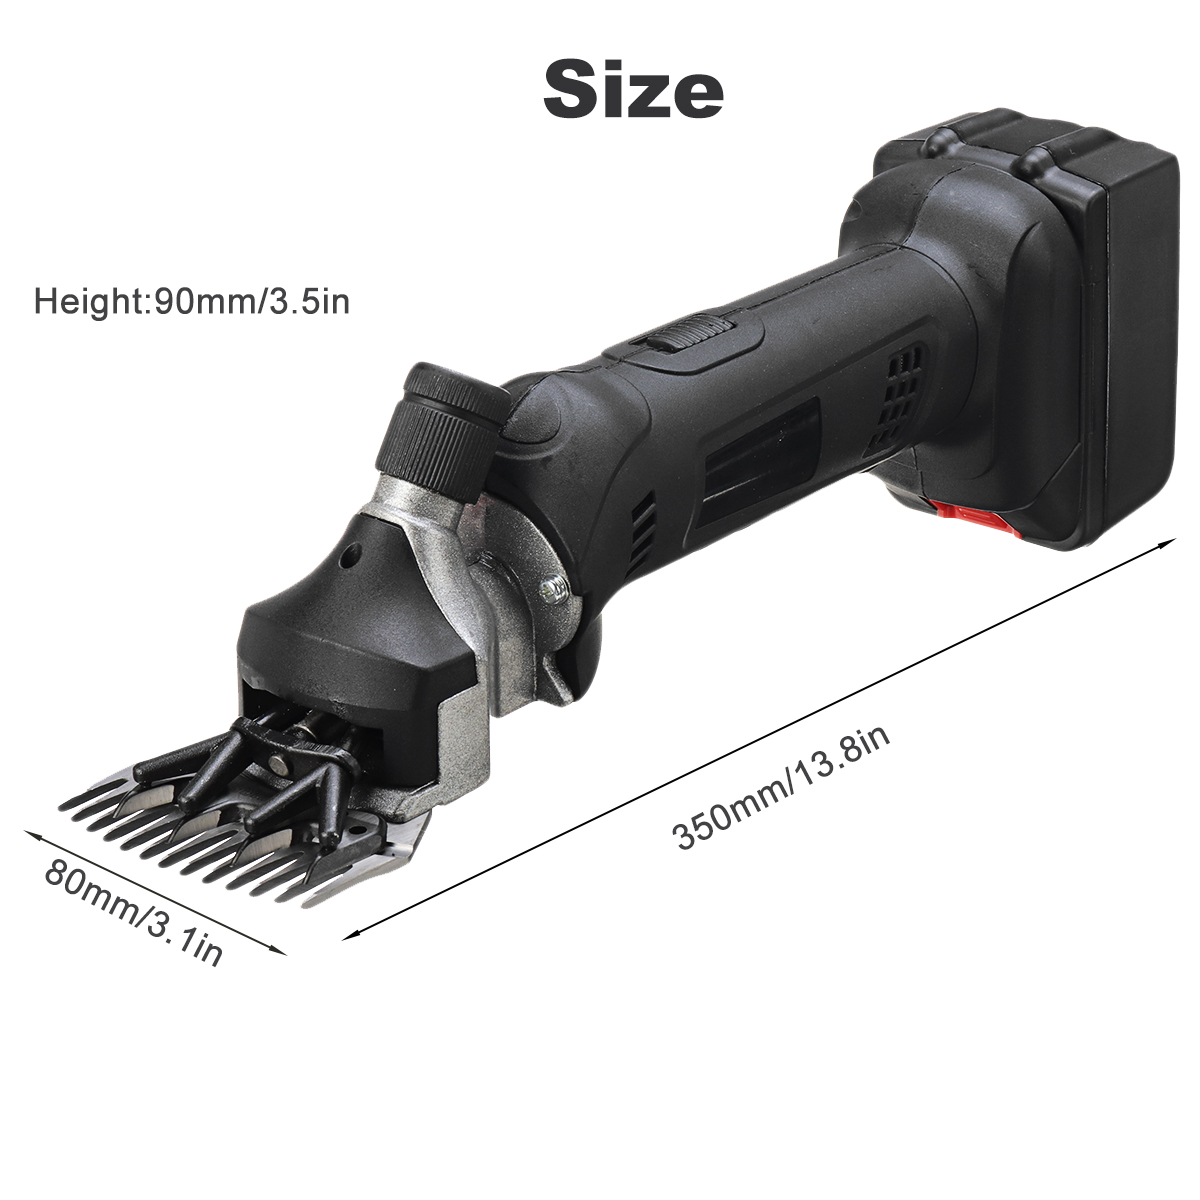 21V-Cordless-Electric-Sheep-Pet-Hair-Clipper-6-Speed-Wool-Trimmer-Shearing-Machine-W-None12-Battery--1878850-9